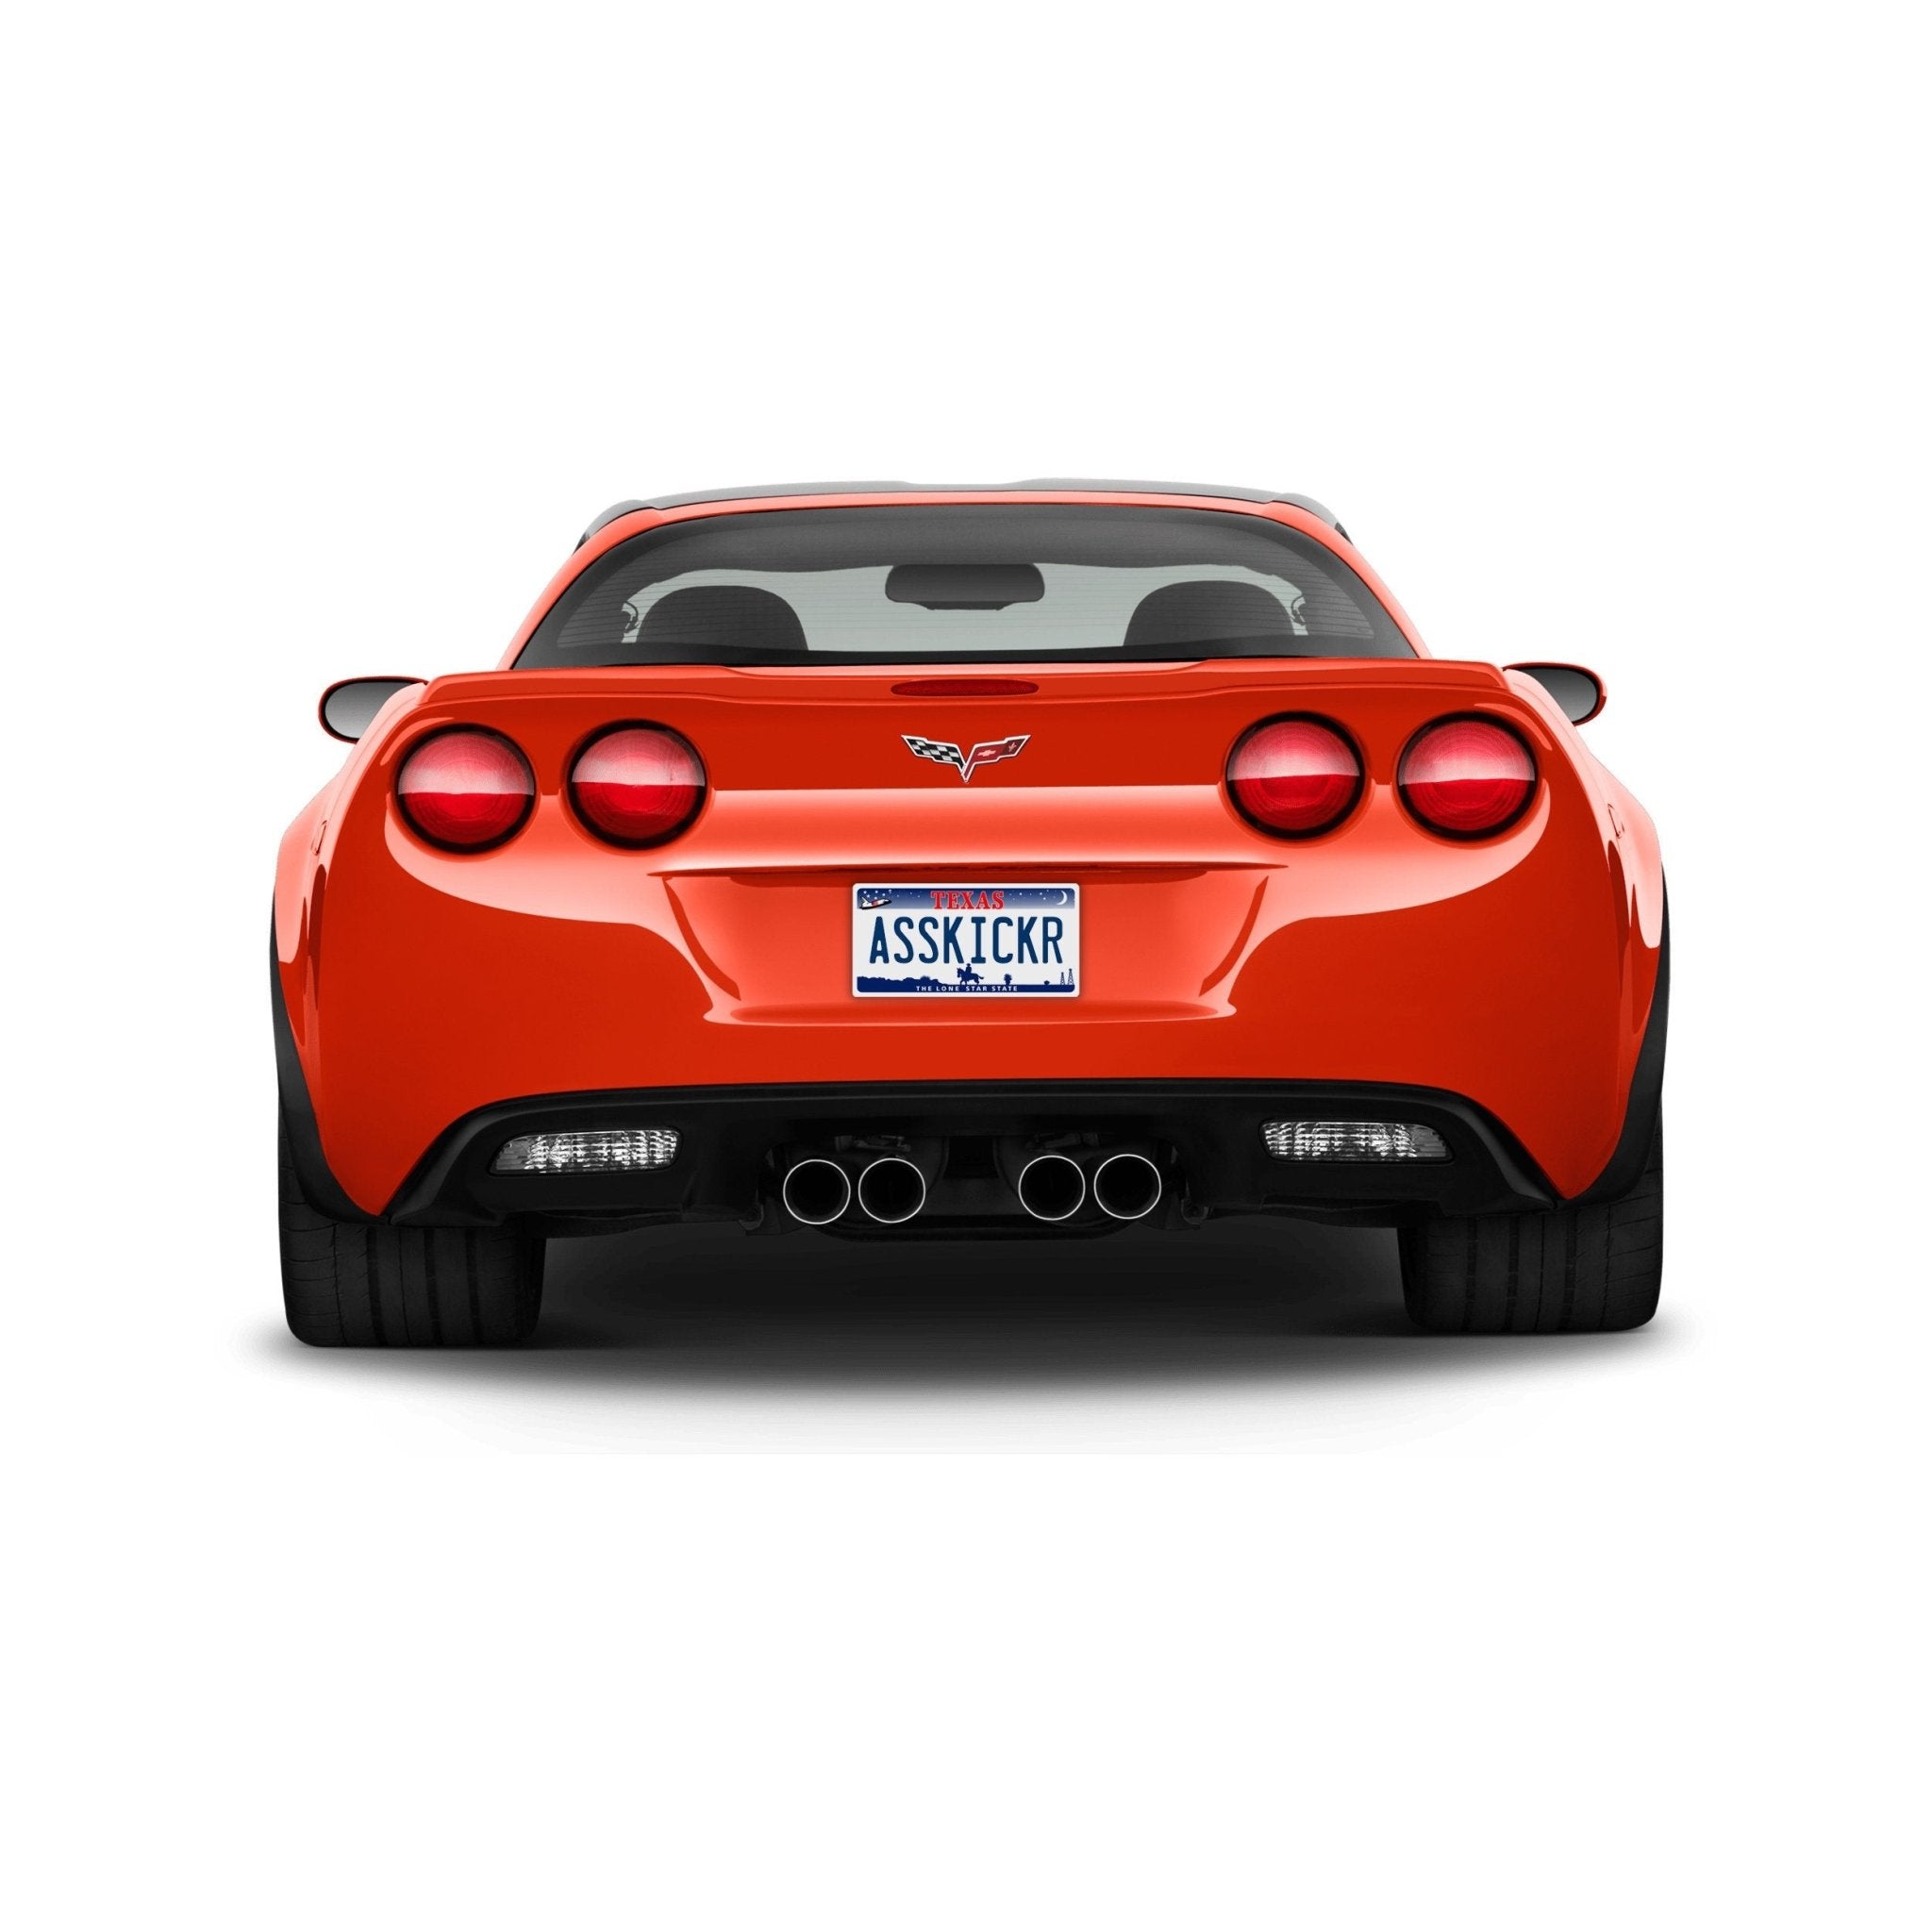 Vanity License Plates for Every State. Create Your Own Vanity Plate - Explore Now! - Vette1 - Misc. License Plates